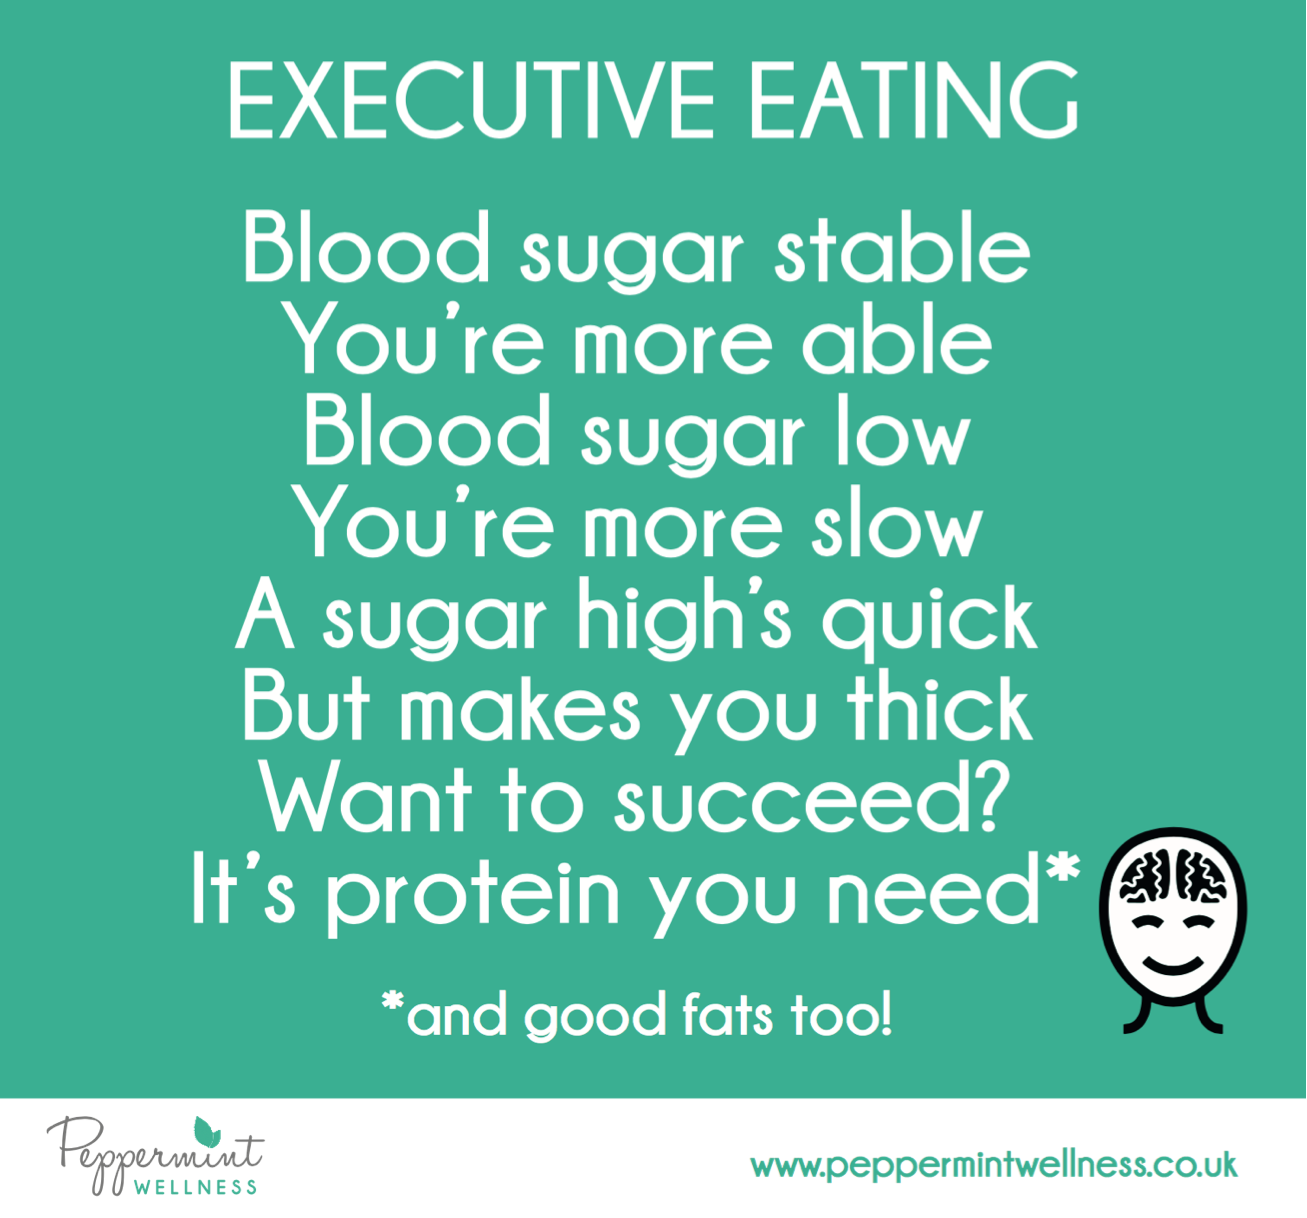 Executive Eating by Peppermint Wellness